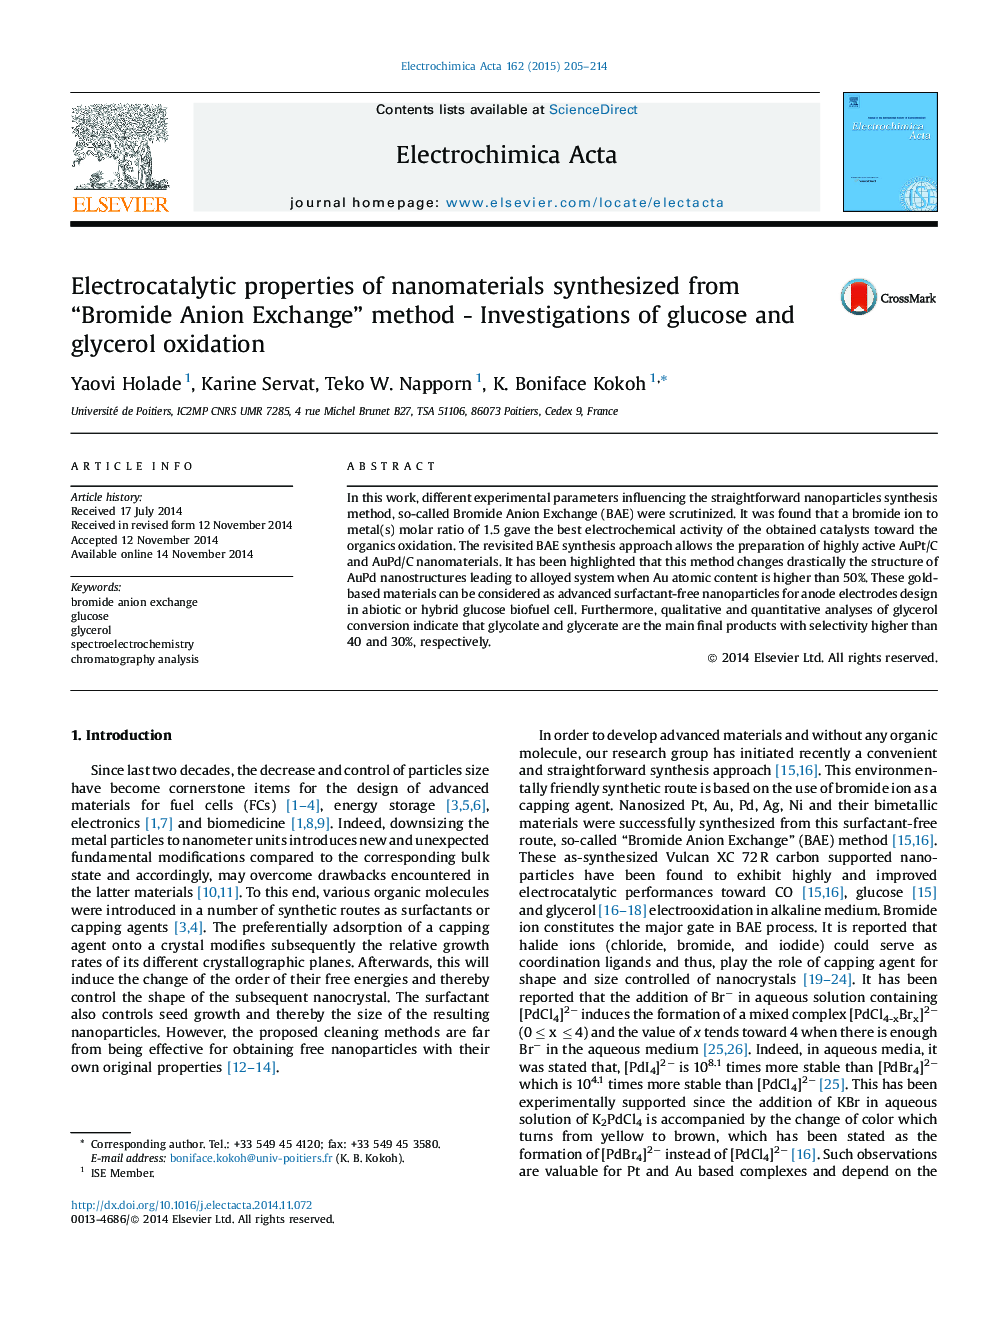 Electrocatalytic properties of nanomaterials synthesized from “Bromide Anion Exchange” method - Investigations of glucose and glycerol oxidation